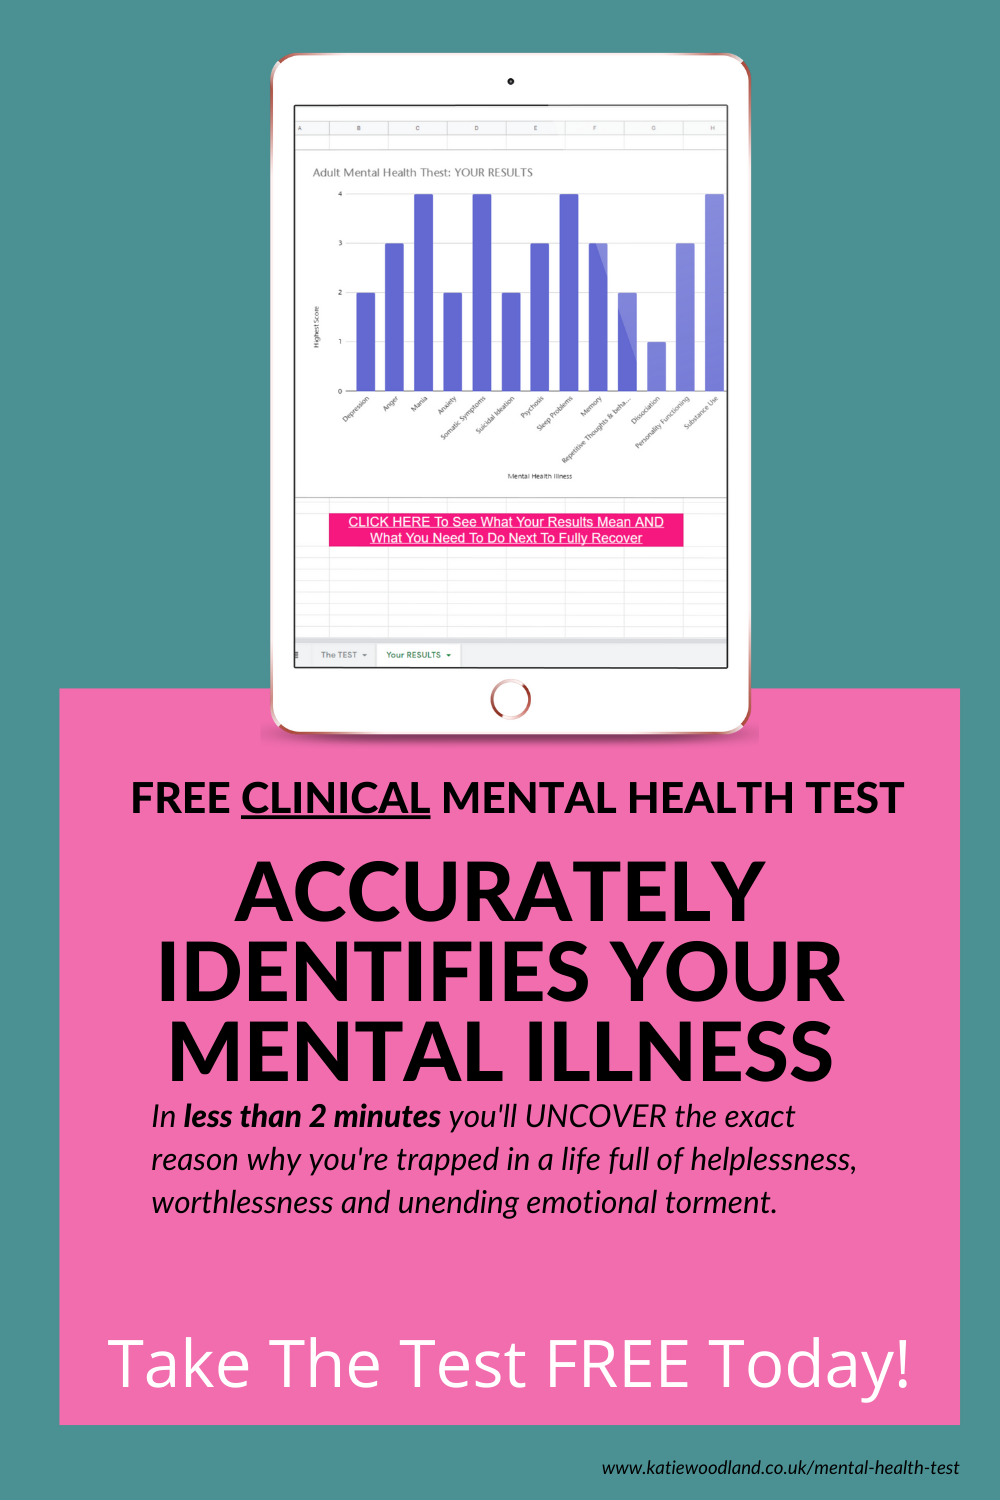 FREE! Clinical Mental Health Test Accurately Identifies Your Mental Illness In Less Than 2 Minutes!